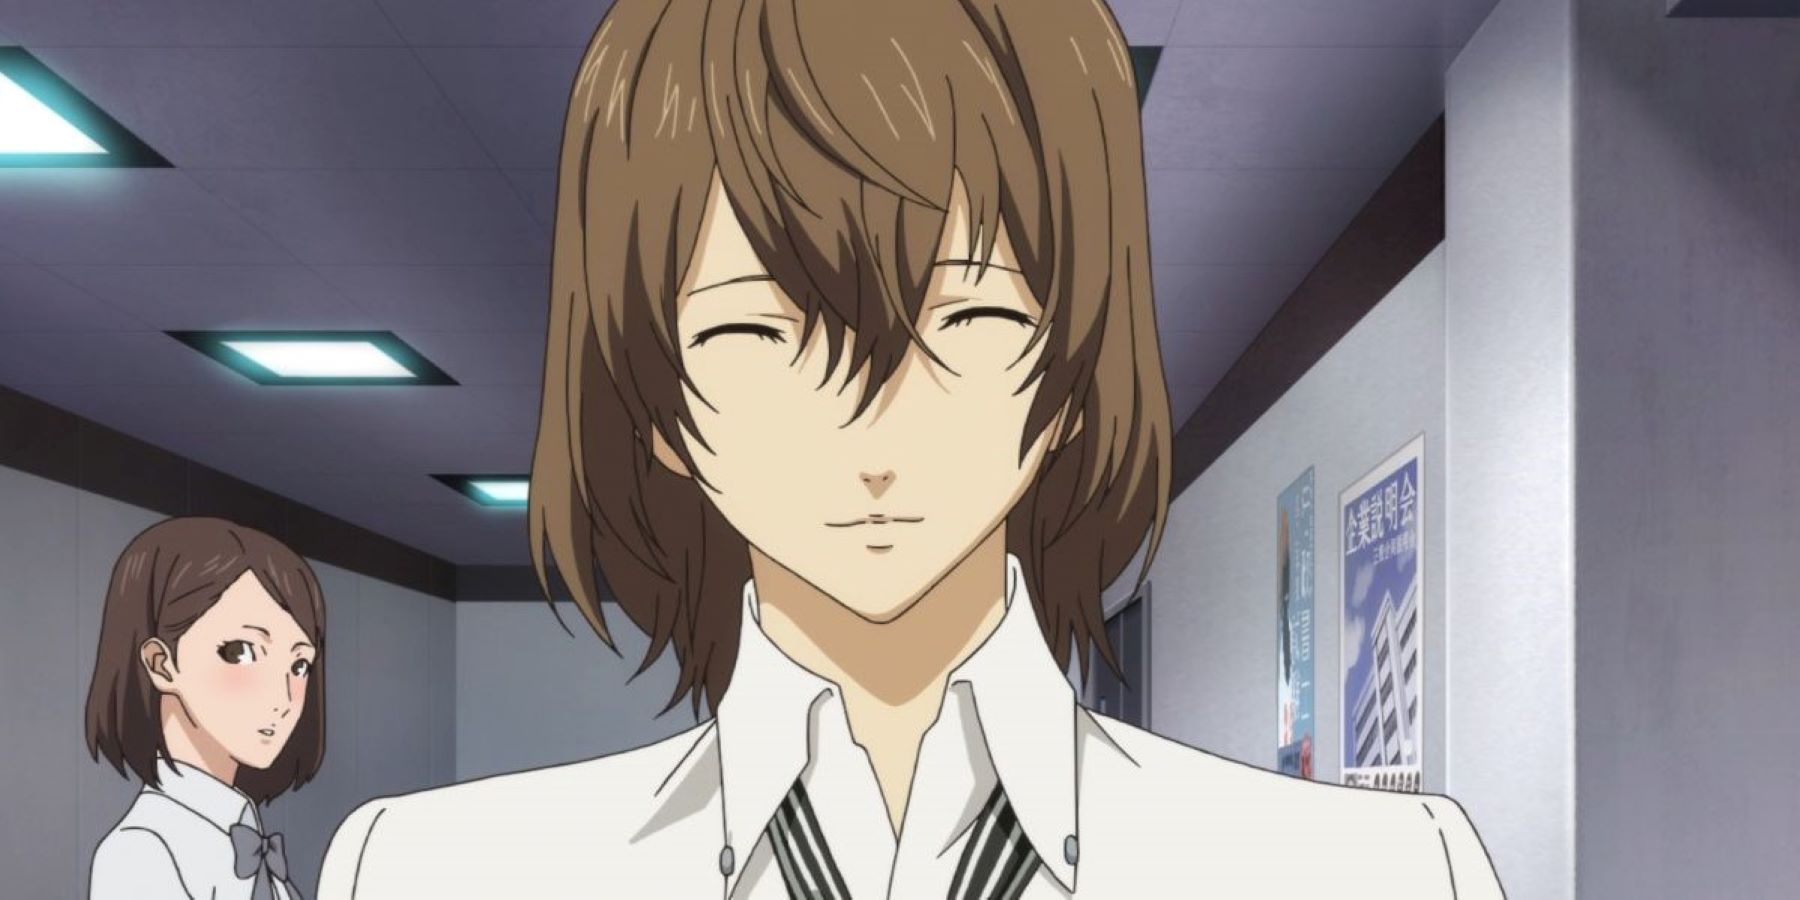 Goro Akechi visiting Shujin Academy in the Persona 5 anime, with a Shujin student in the background